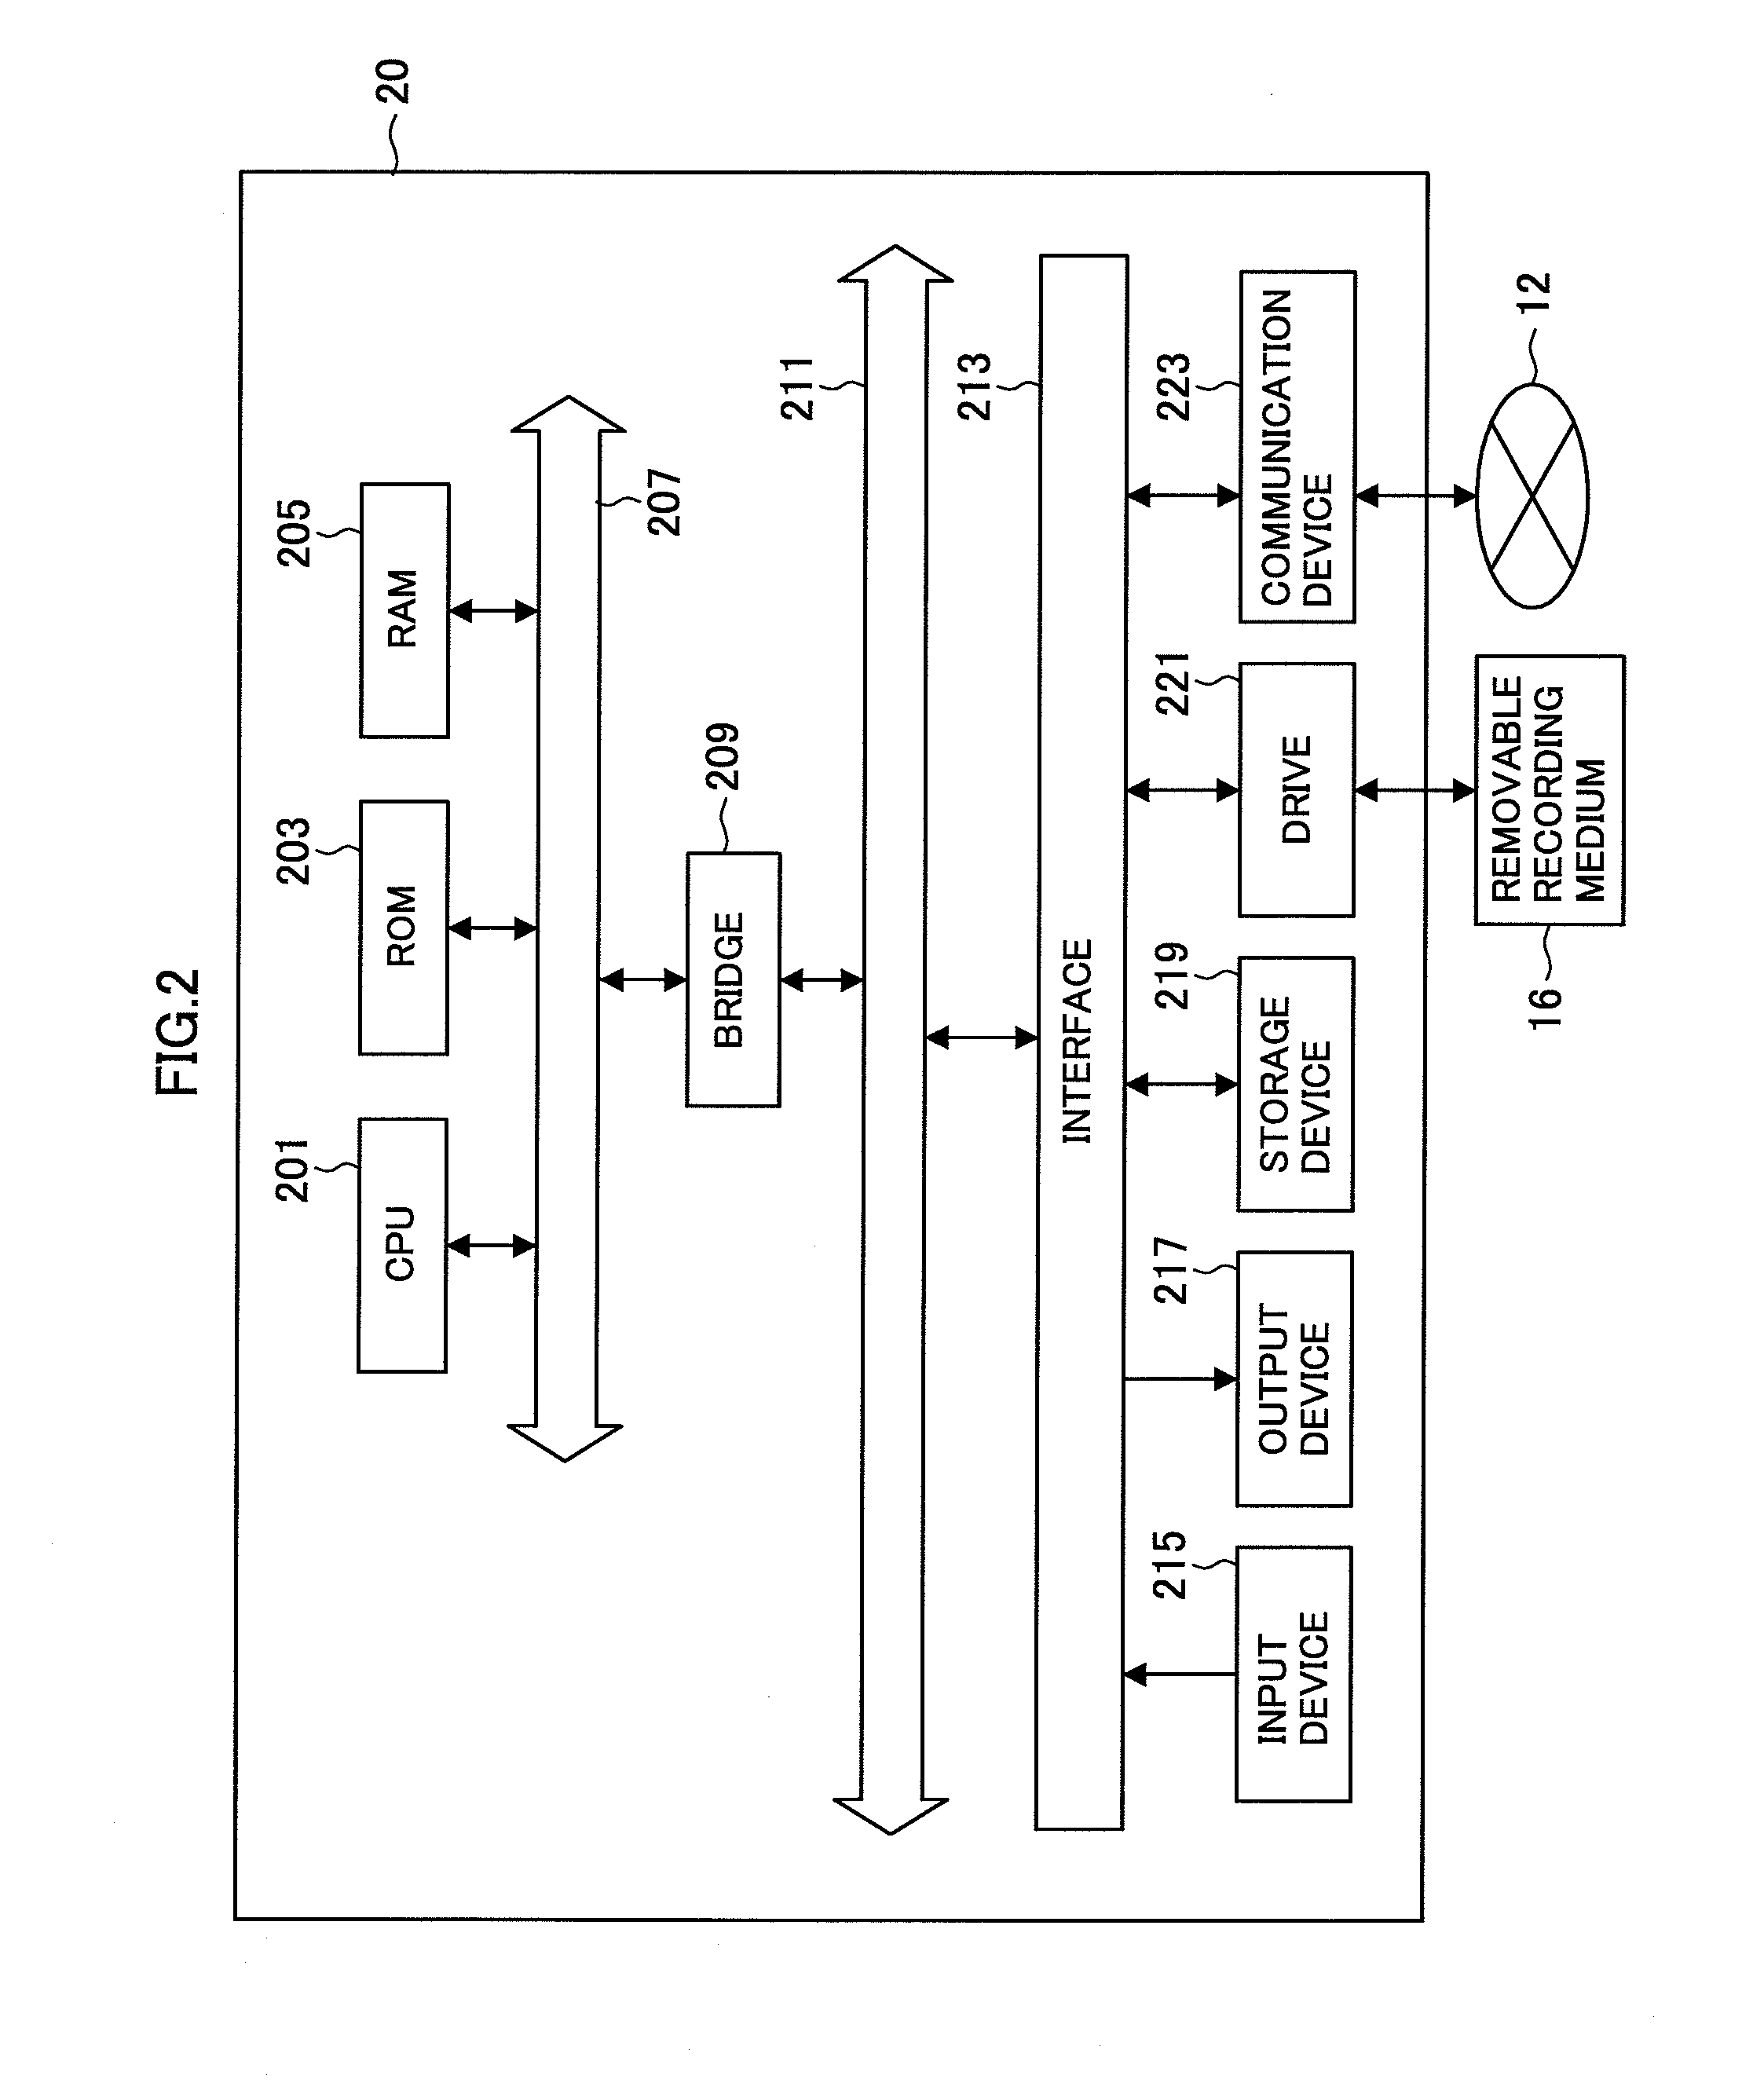 Voice chat system, information processing apparatus, speech recognition method, keyword data electrode detection method, and program